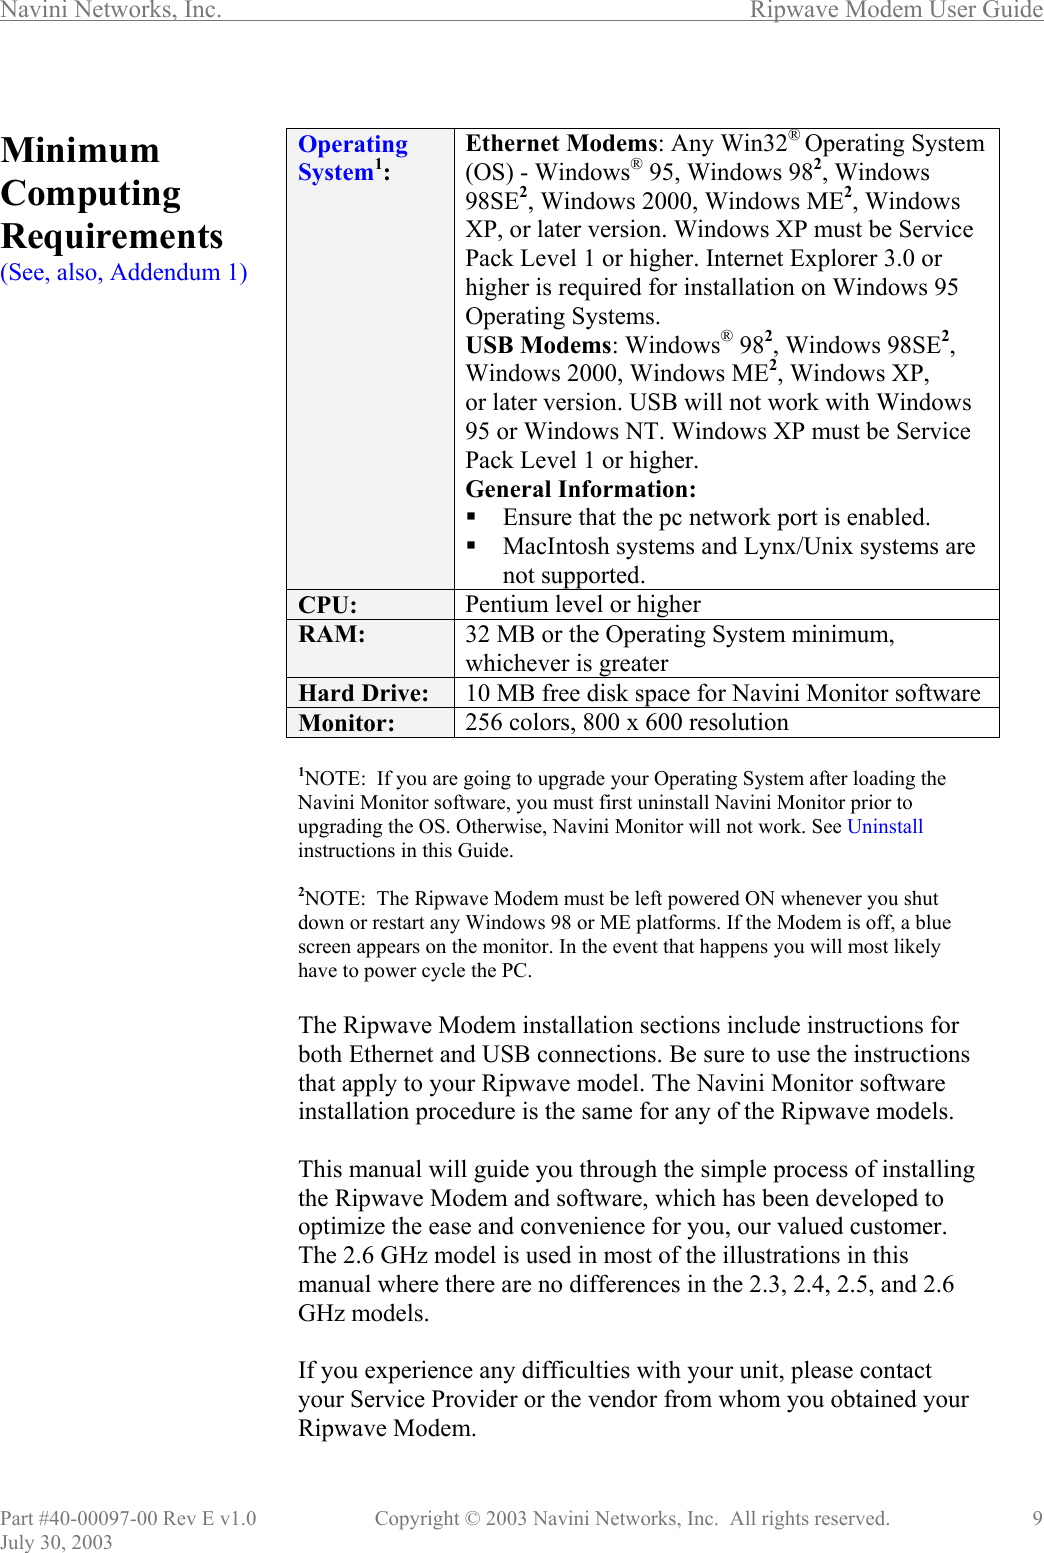 Navini Networks, Inc.        Ripwave Modem User Guide Part #40-00097-00 Rev E v1.0    Copyright © 2003 Navini Networks, Inc.  All rights reserved.               9 July 30, 2003  Minimum Computing Requirements (See, also, Addendum 1)                                          Operating System1: Ethernet Modems: Any Win32® Operating System (OS) - Windows® 95, Windows 982, Windows 98SE2, Windows 2000, Windows ME2, Windows XP, or later version. Windows XP must be Service Pack Level 1 or higher. Internet Explorer 3.0 or higher is required for installation on Windows 95 Operating Systems. USB Modems: Windows® 982, Windows 98SE2, Windows 2000, Windows ME2, Windows XP, or later version. USB will not work with Windows 95 or Windows NT. Windows XP must be Service Pack Level 1 or higher. General Information:  Ensure that the pc network port is enabled.  MacIntosh systems and Lynx/Unix systems are not supported. CPU:  Pentium level or higher RAM:  32 MB or the Operating System minimum, whichever is greater Hard Drive:  10 MB free disk space for Navini Monitor software Monitor:  256 colors, 800 x 600 resolution   1NOTE:  If you are going to upgrade your Operating System after loading the Navini Monitor software, you must first uninstall Navini Monitor prior to upgrading the OS. Otherwise, Navini Monitor will not work. See Uninstall instructions in this Guide.  2NOTE:  The Ripwave Modem must be left powered ON whenever you shut down or restart any Windows 98 or ME platforms. If the Modem is off, a blue screen appears on the monitor. In the event that happens you will most likely have to power cycle the PC.  The Ripwave Modem installation sections include instructions for both Ethernet and USB connections. Be sure to use the instructions that apply to your Ripwave model. The Navini Monitor software installation procedure is the same for any of the Ripwave models.  This manual will guide you through the simple process of installing the Ripwave Modem and software, which has been developed to optimize the ease and convenience for you, our valued customer. The 2.6 GHz model is used in most of the illustrations in this manual where there are no differences in the 2.3, 2.4, 2.5, and 2.6 GHz models.   If you experience any difficulties with your unit, please contact your Service Provider or the vendor from whom you obtained your Ripwave Modem. 